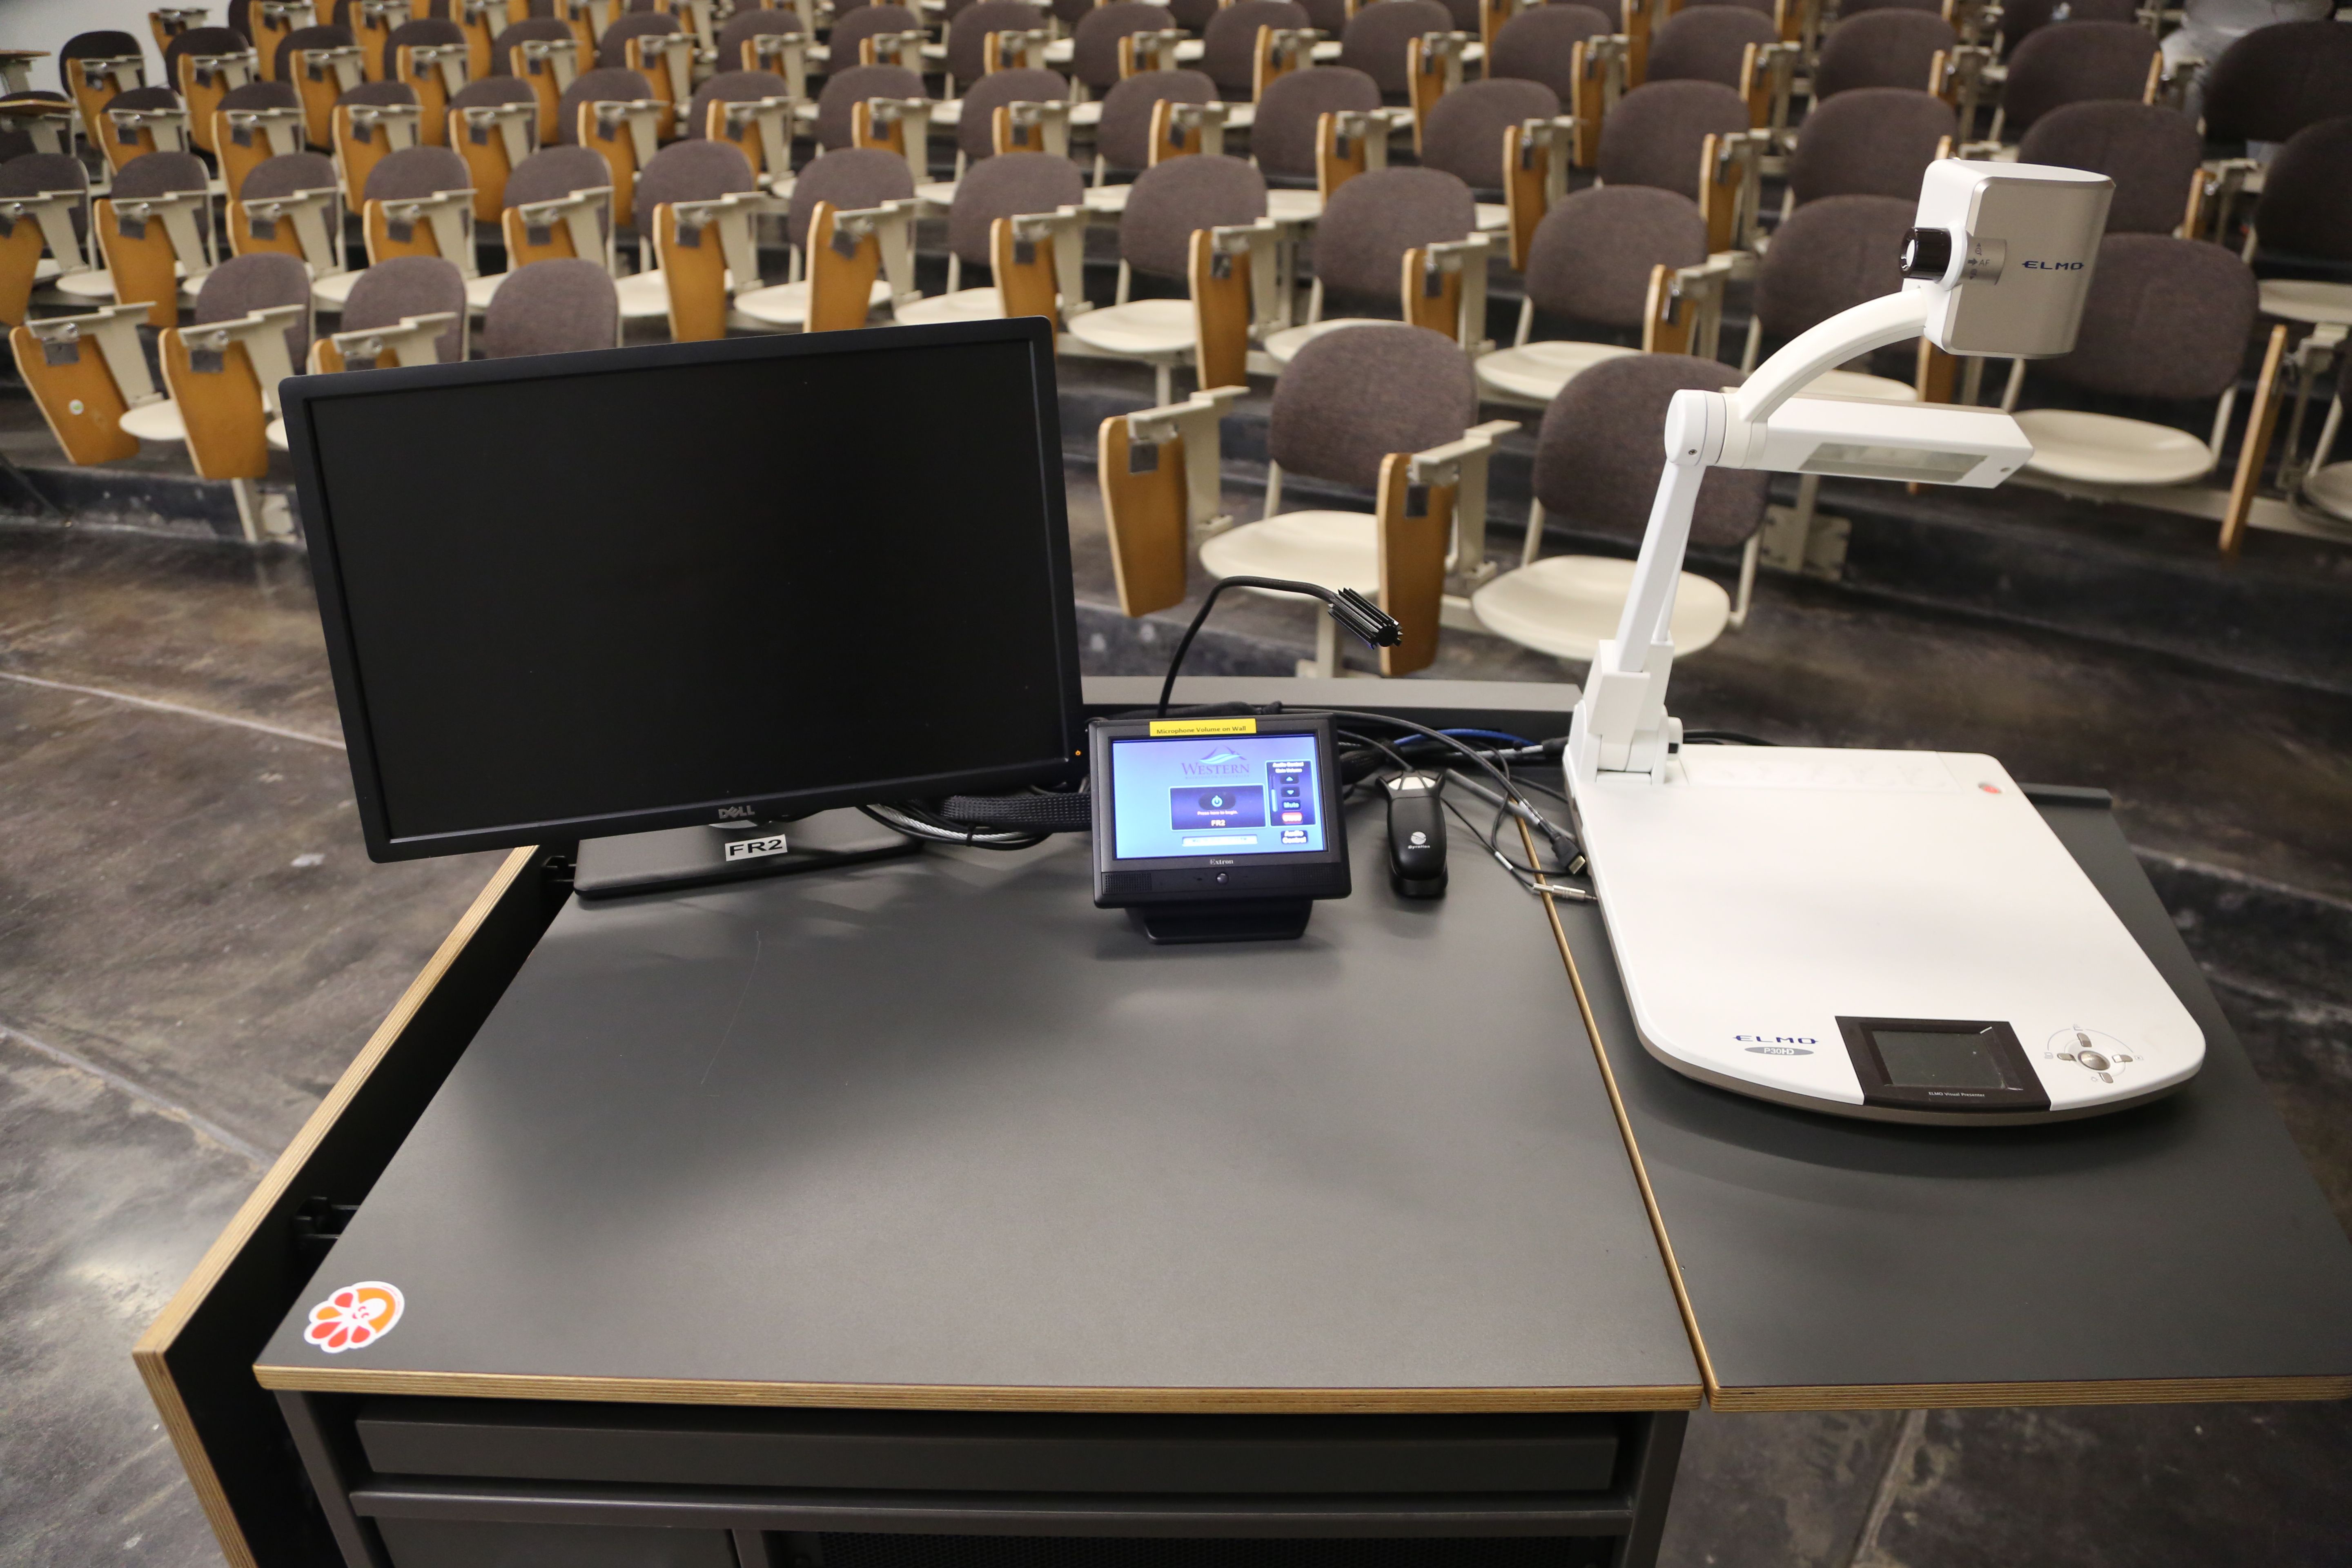 Top of the podium has an Elmo document camera, a Dell PC Monitor, and a AV touch screen controller